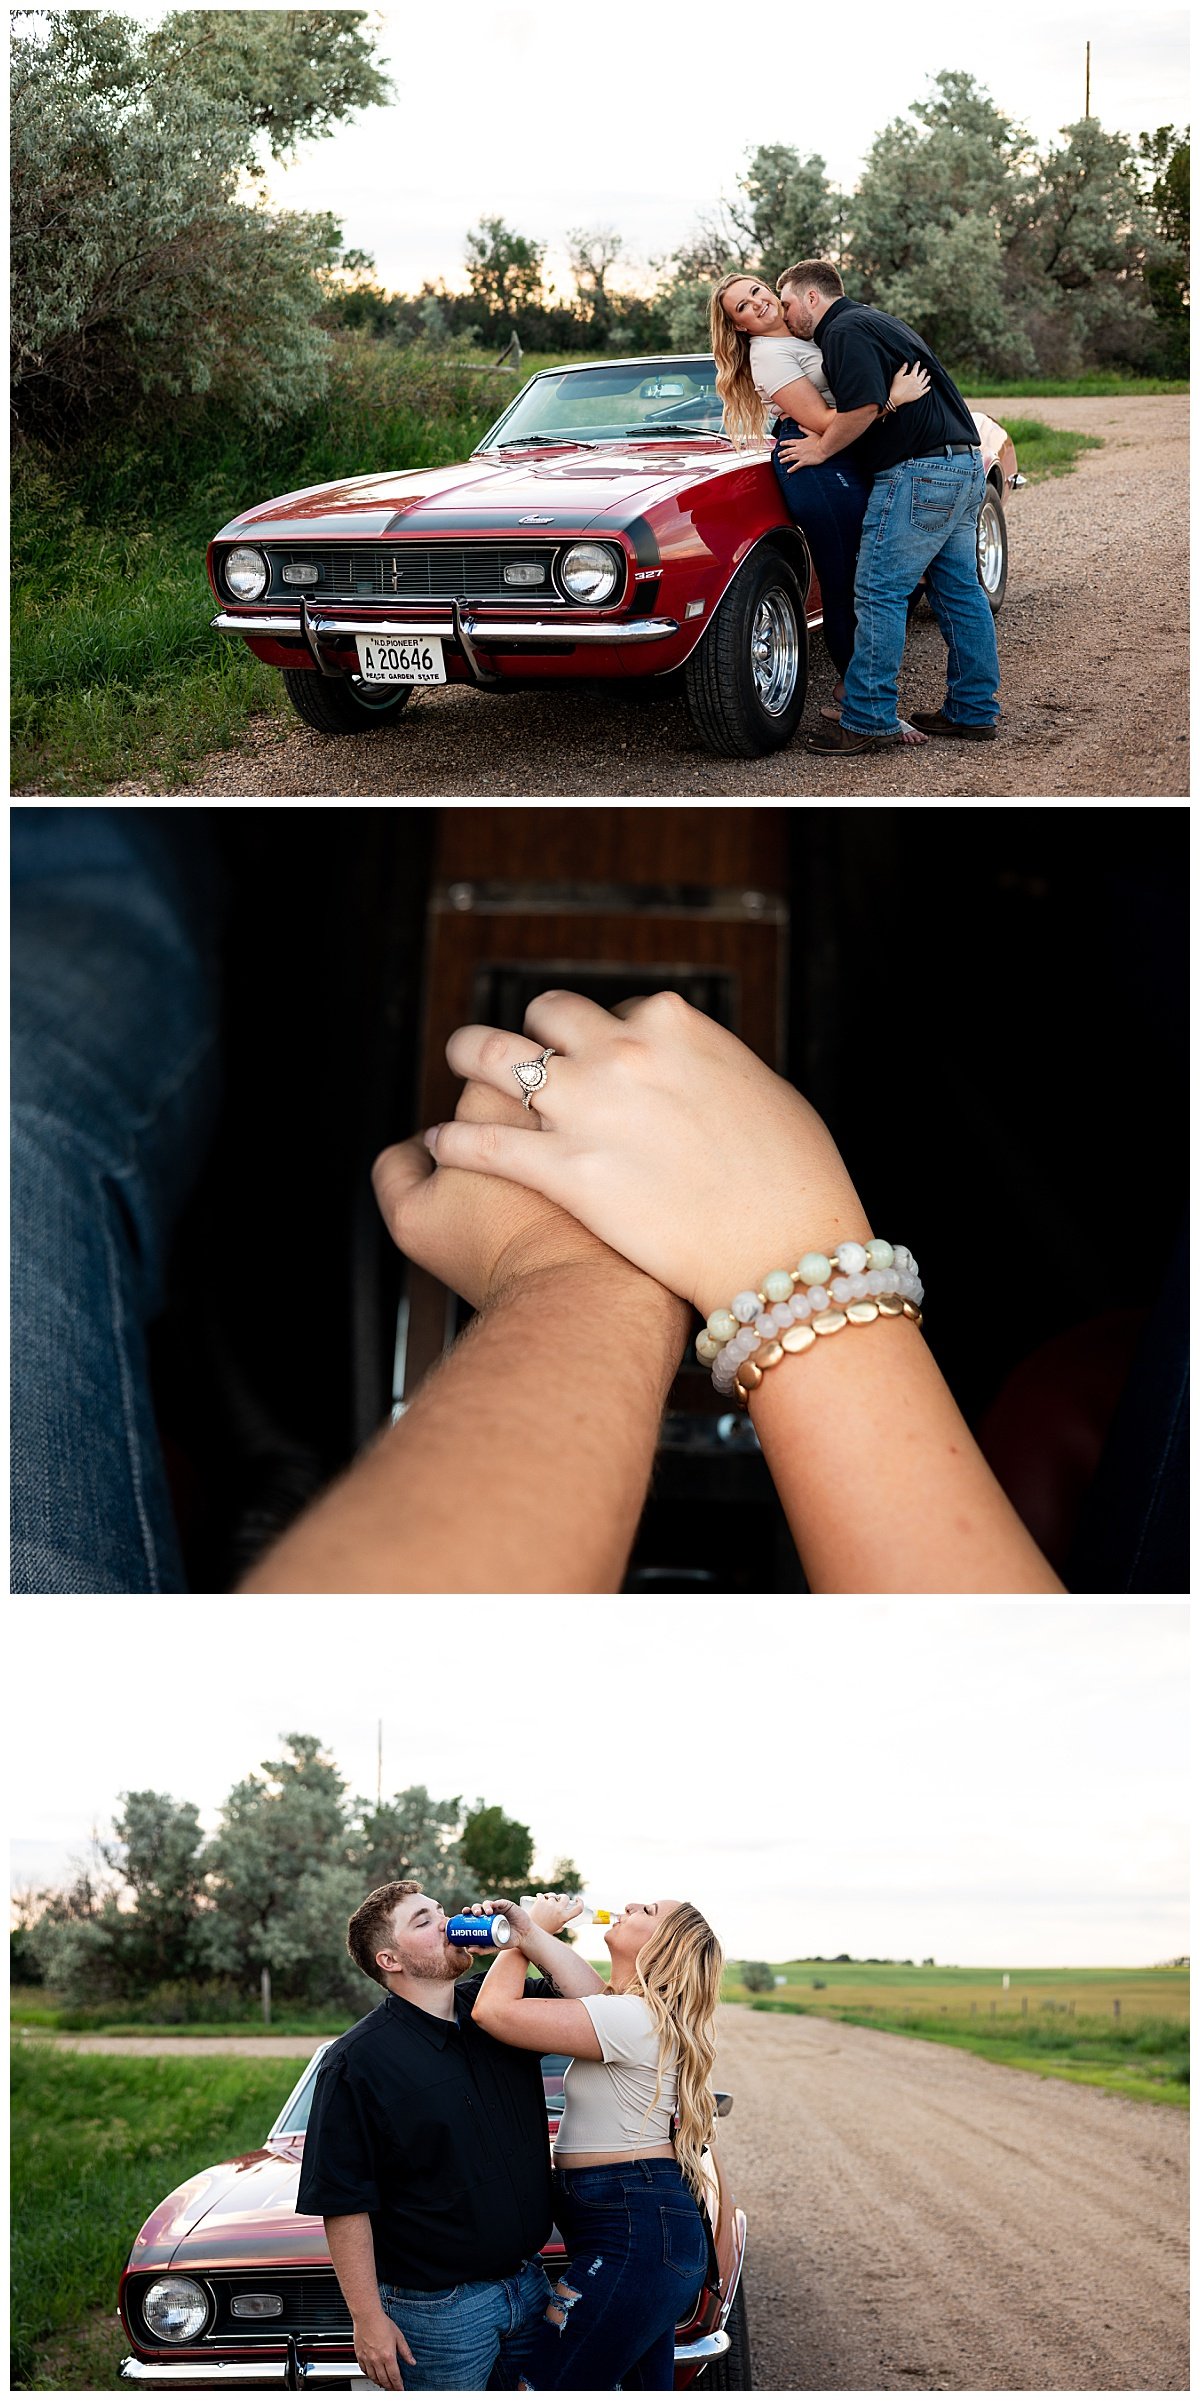 Leaning against a 1974 Chevy Camaro, a newly engaged North Dakota couple cheers to their engagement during an outdoor evening photoshoot.